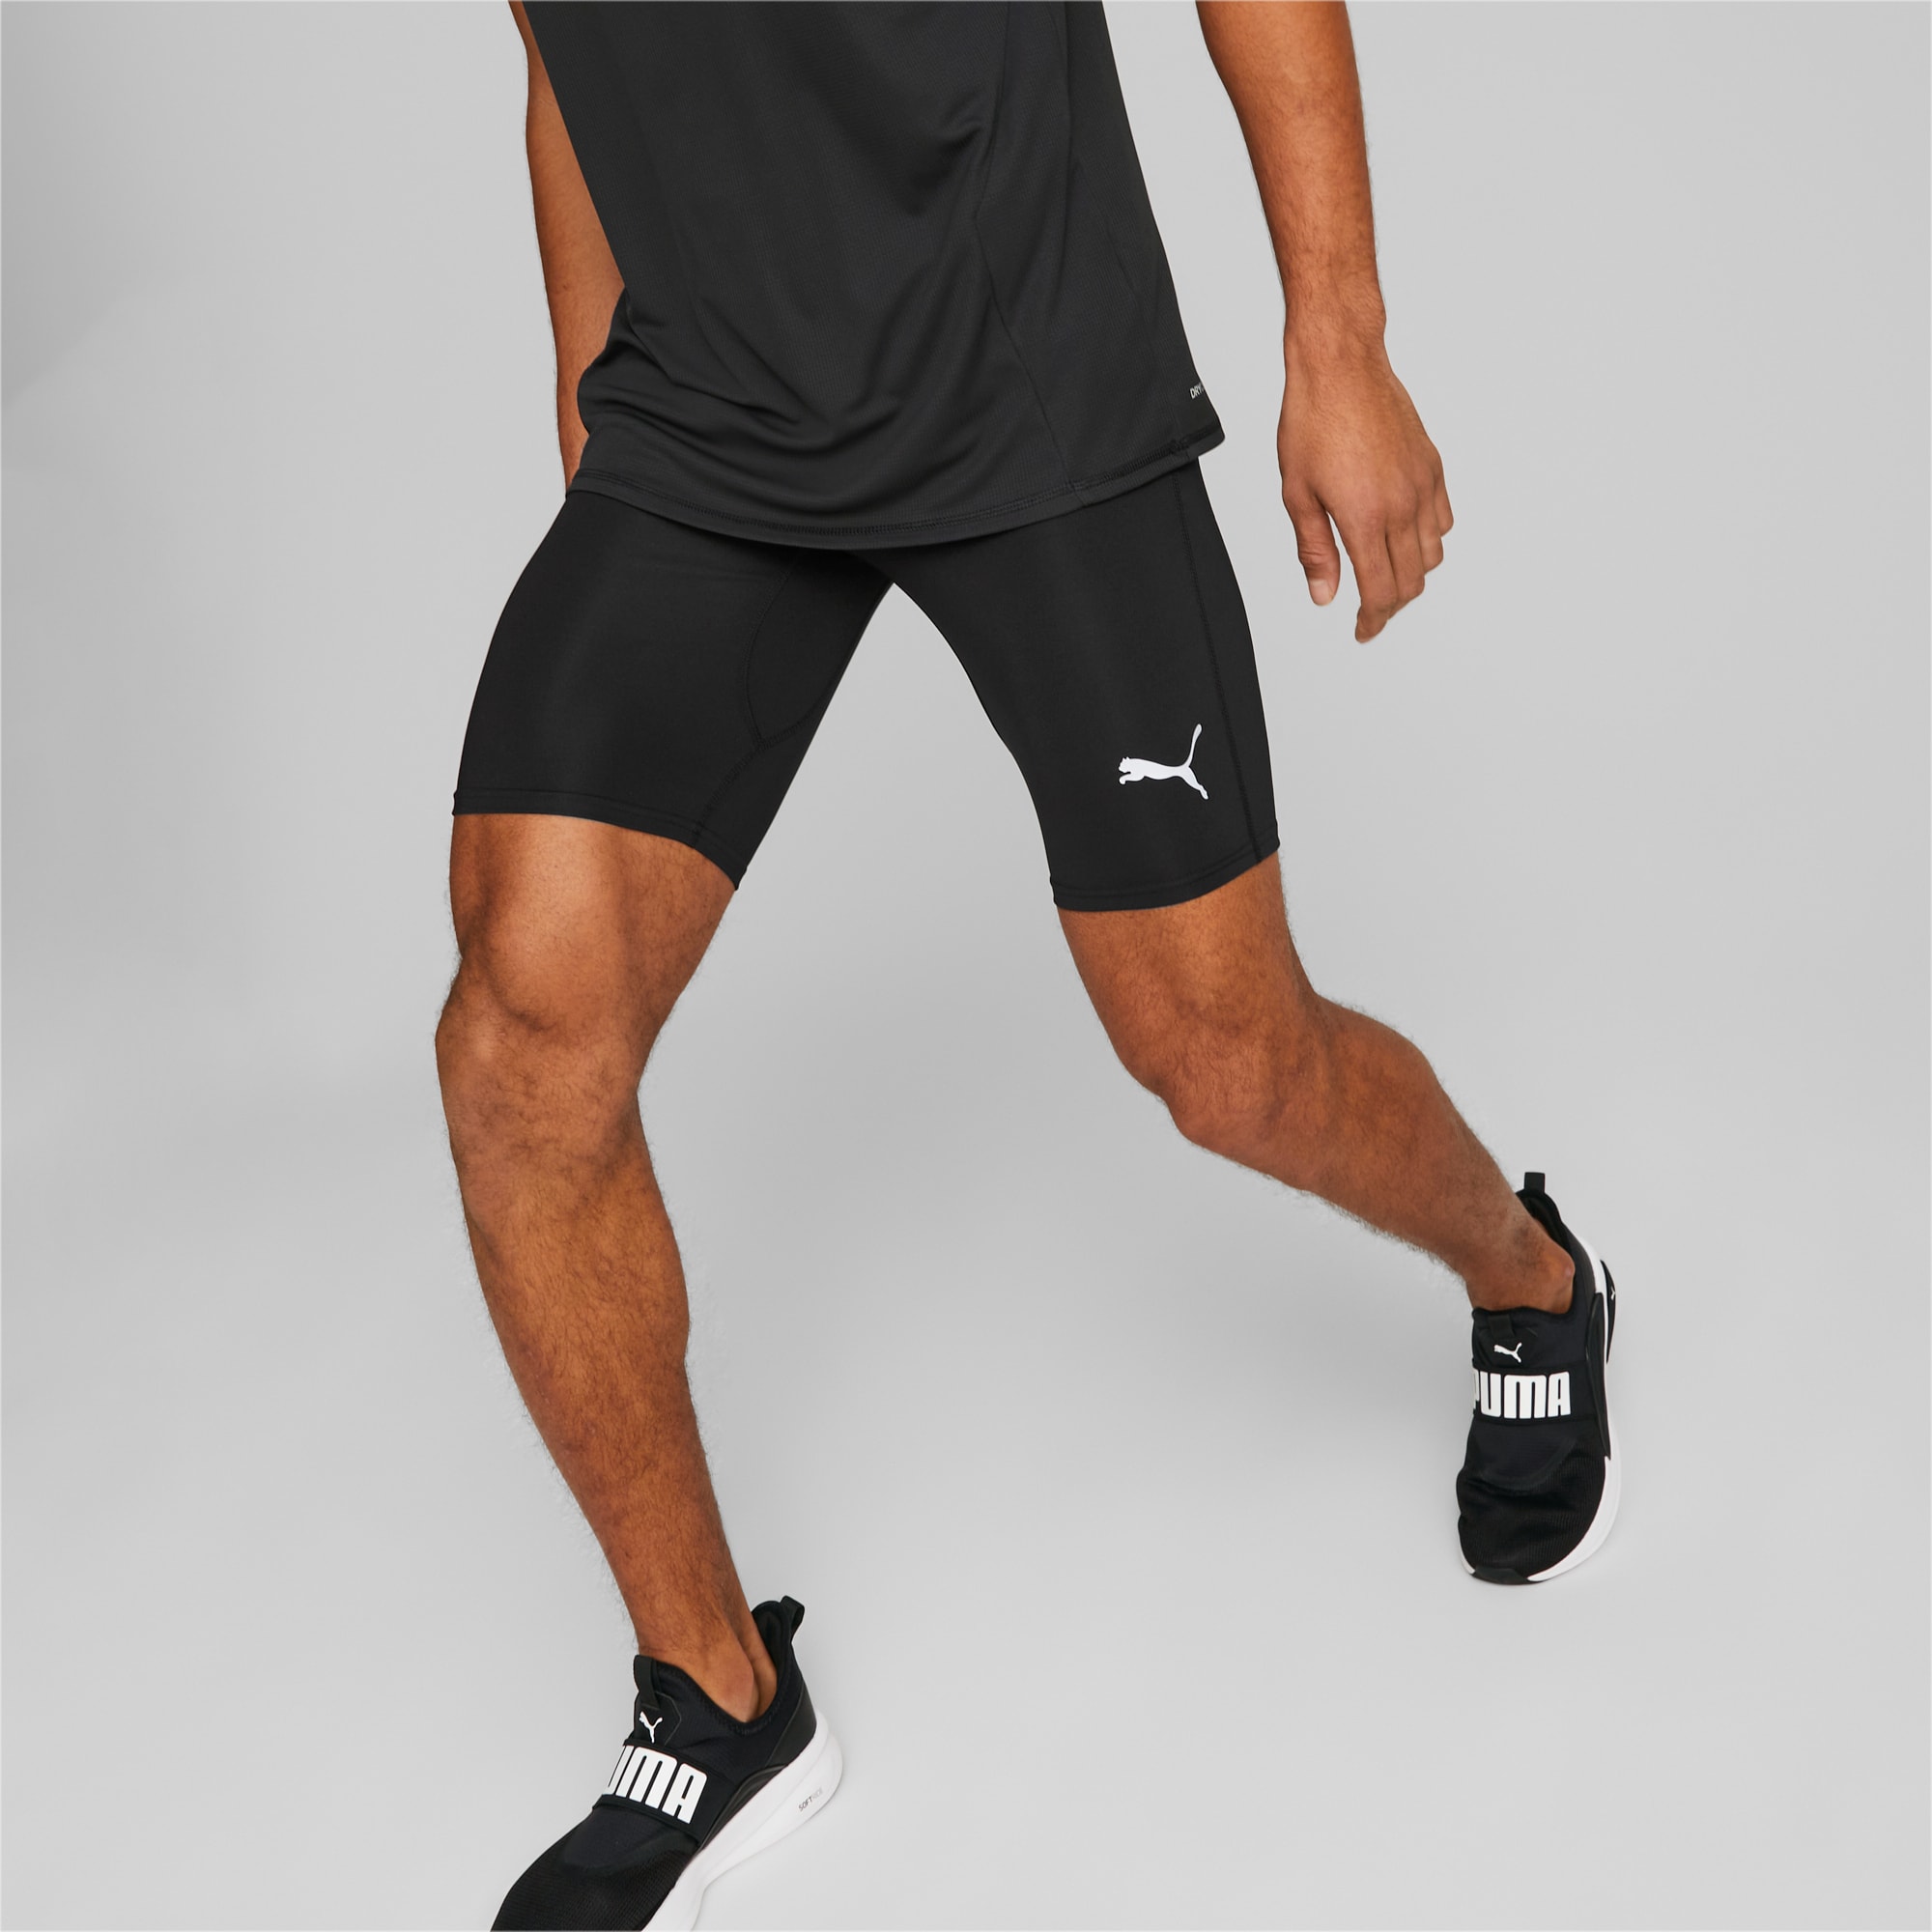 Men's Outdoor Sports Quick-Drying Running Shorts, Basketball Compression  Shorts For Gym Exercise